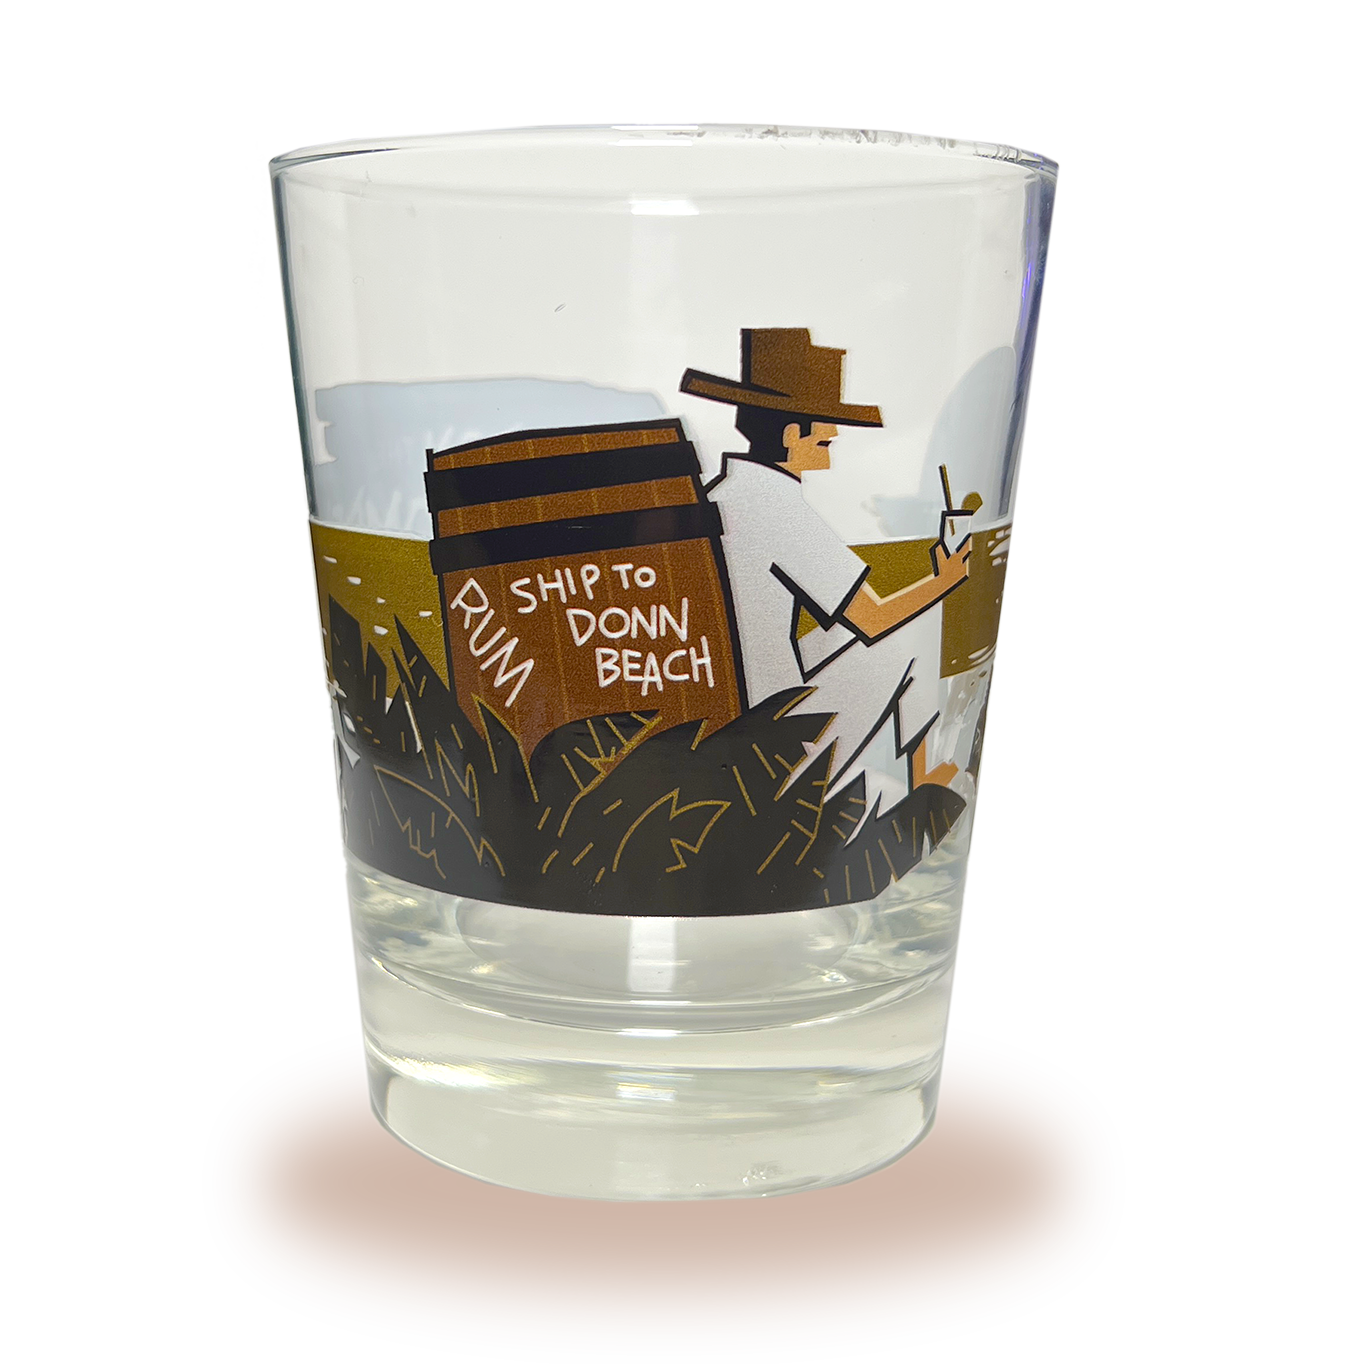 A Mai Tai glass with Donn Beach leaning on a rum barrel on a beach that says “rum ship to Donn Beach” on one side and the Don the Beachcomber Logo on the other side.